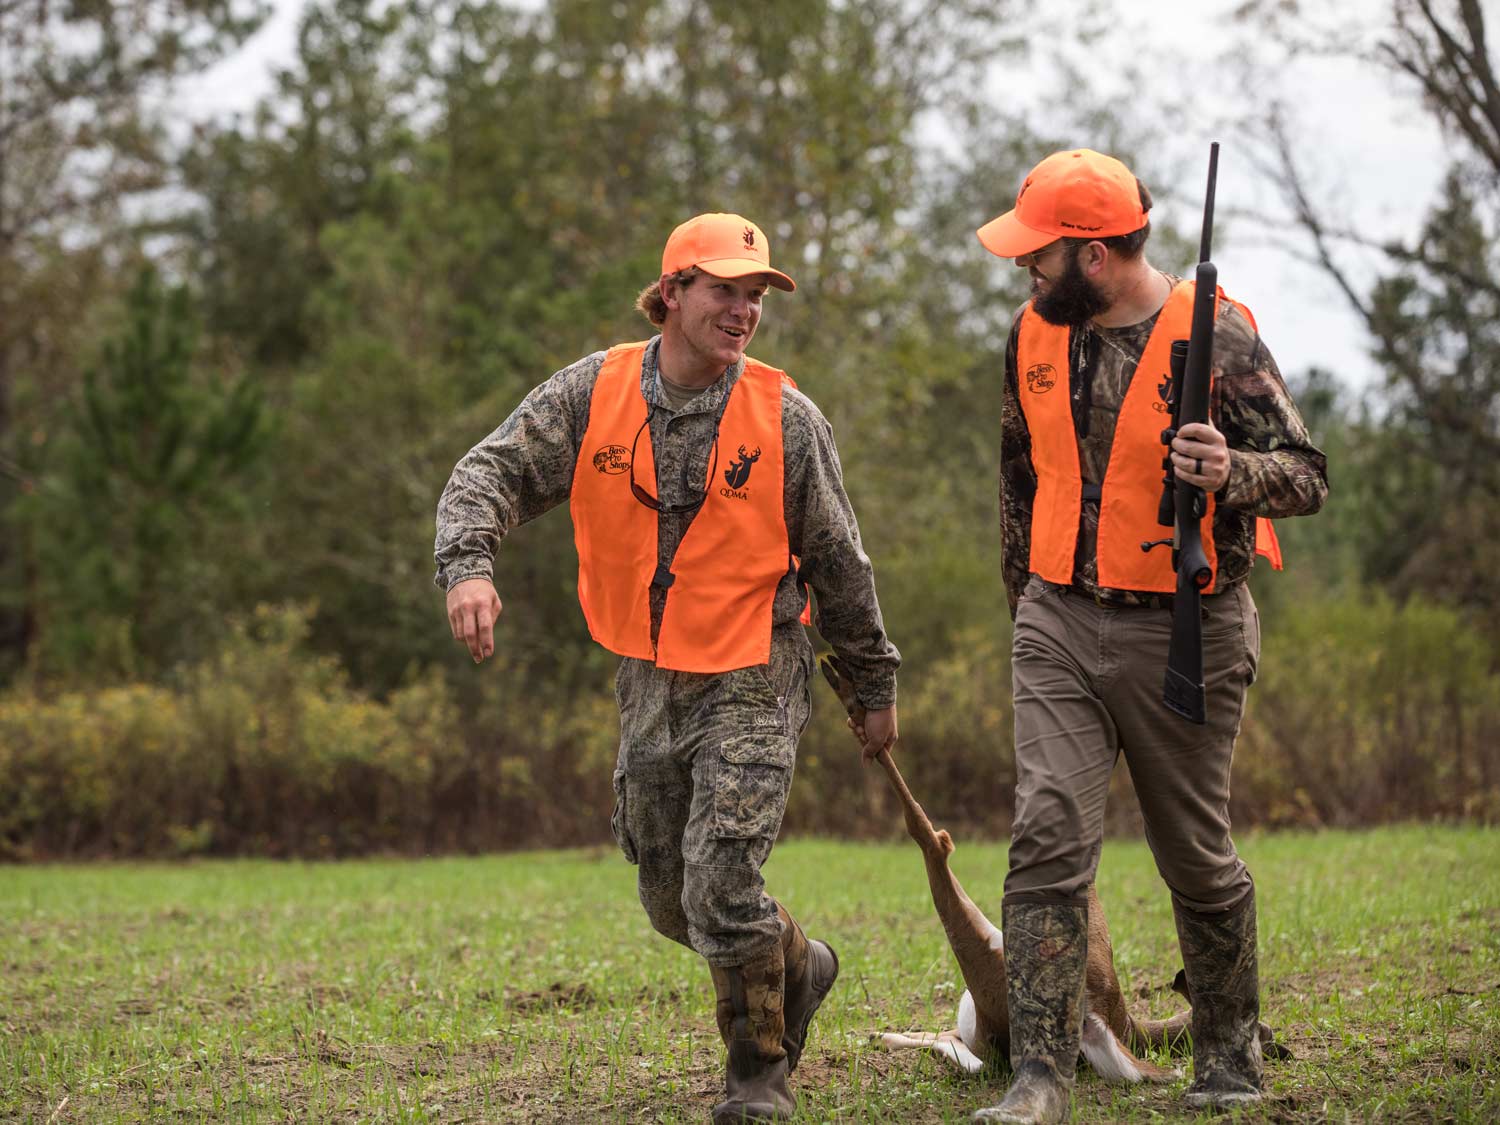 Two hunters in camo and orange vests drag a deer.